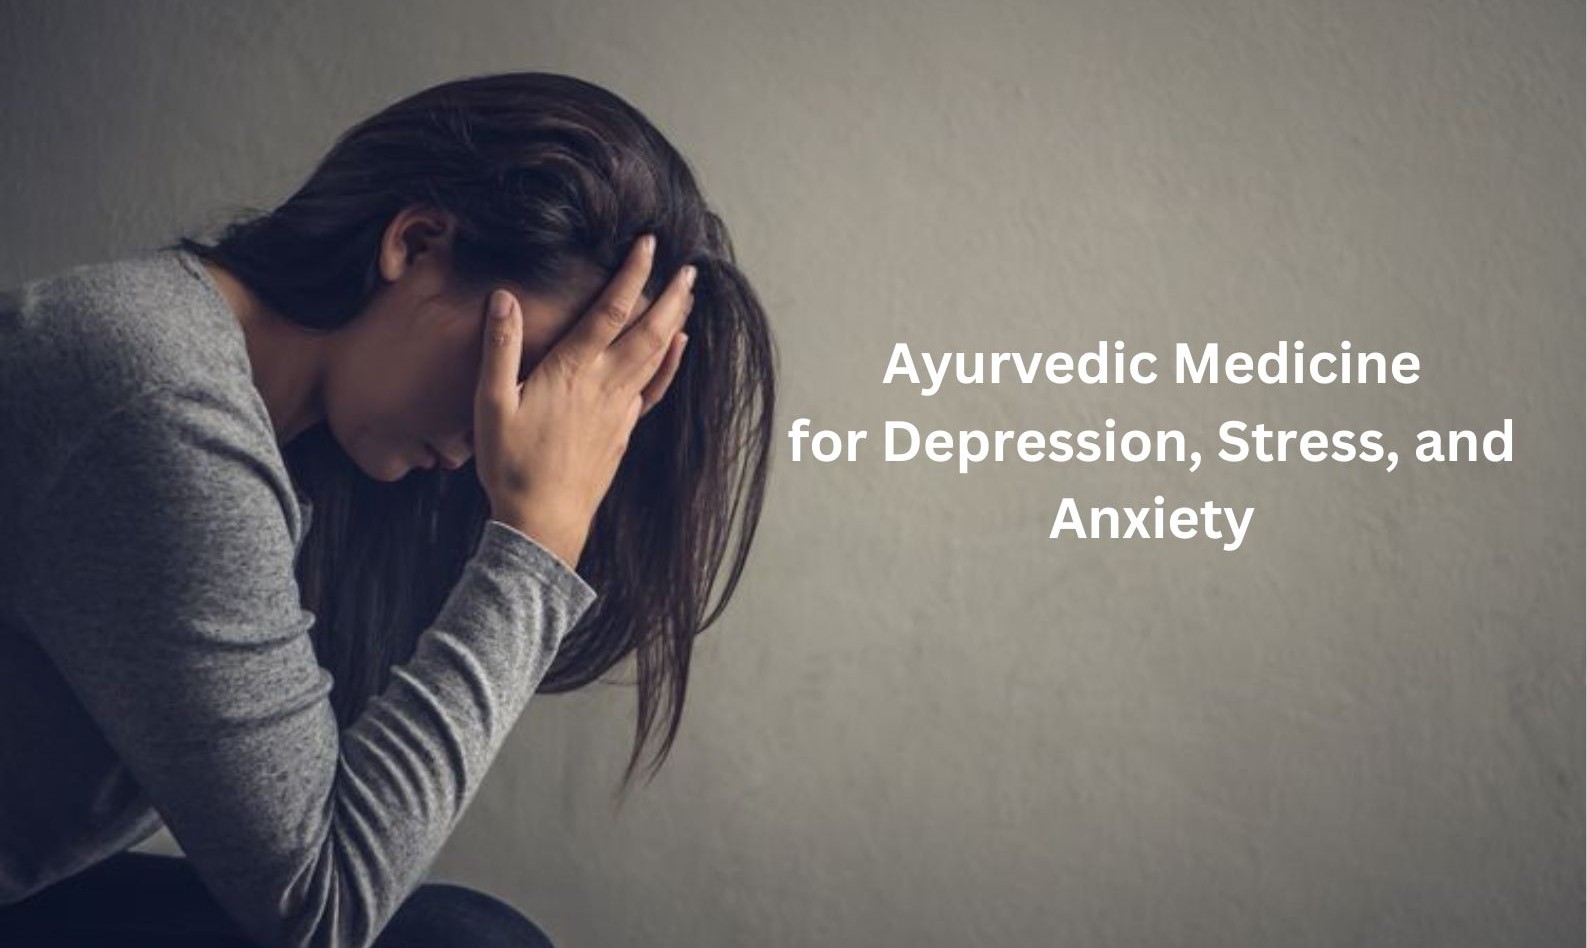 Ayurvedic Medicine for Depression, Stress, and Anxiety